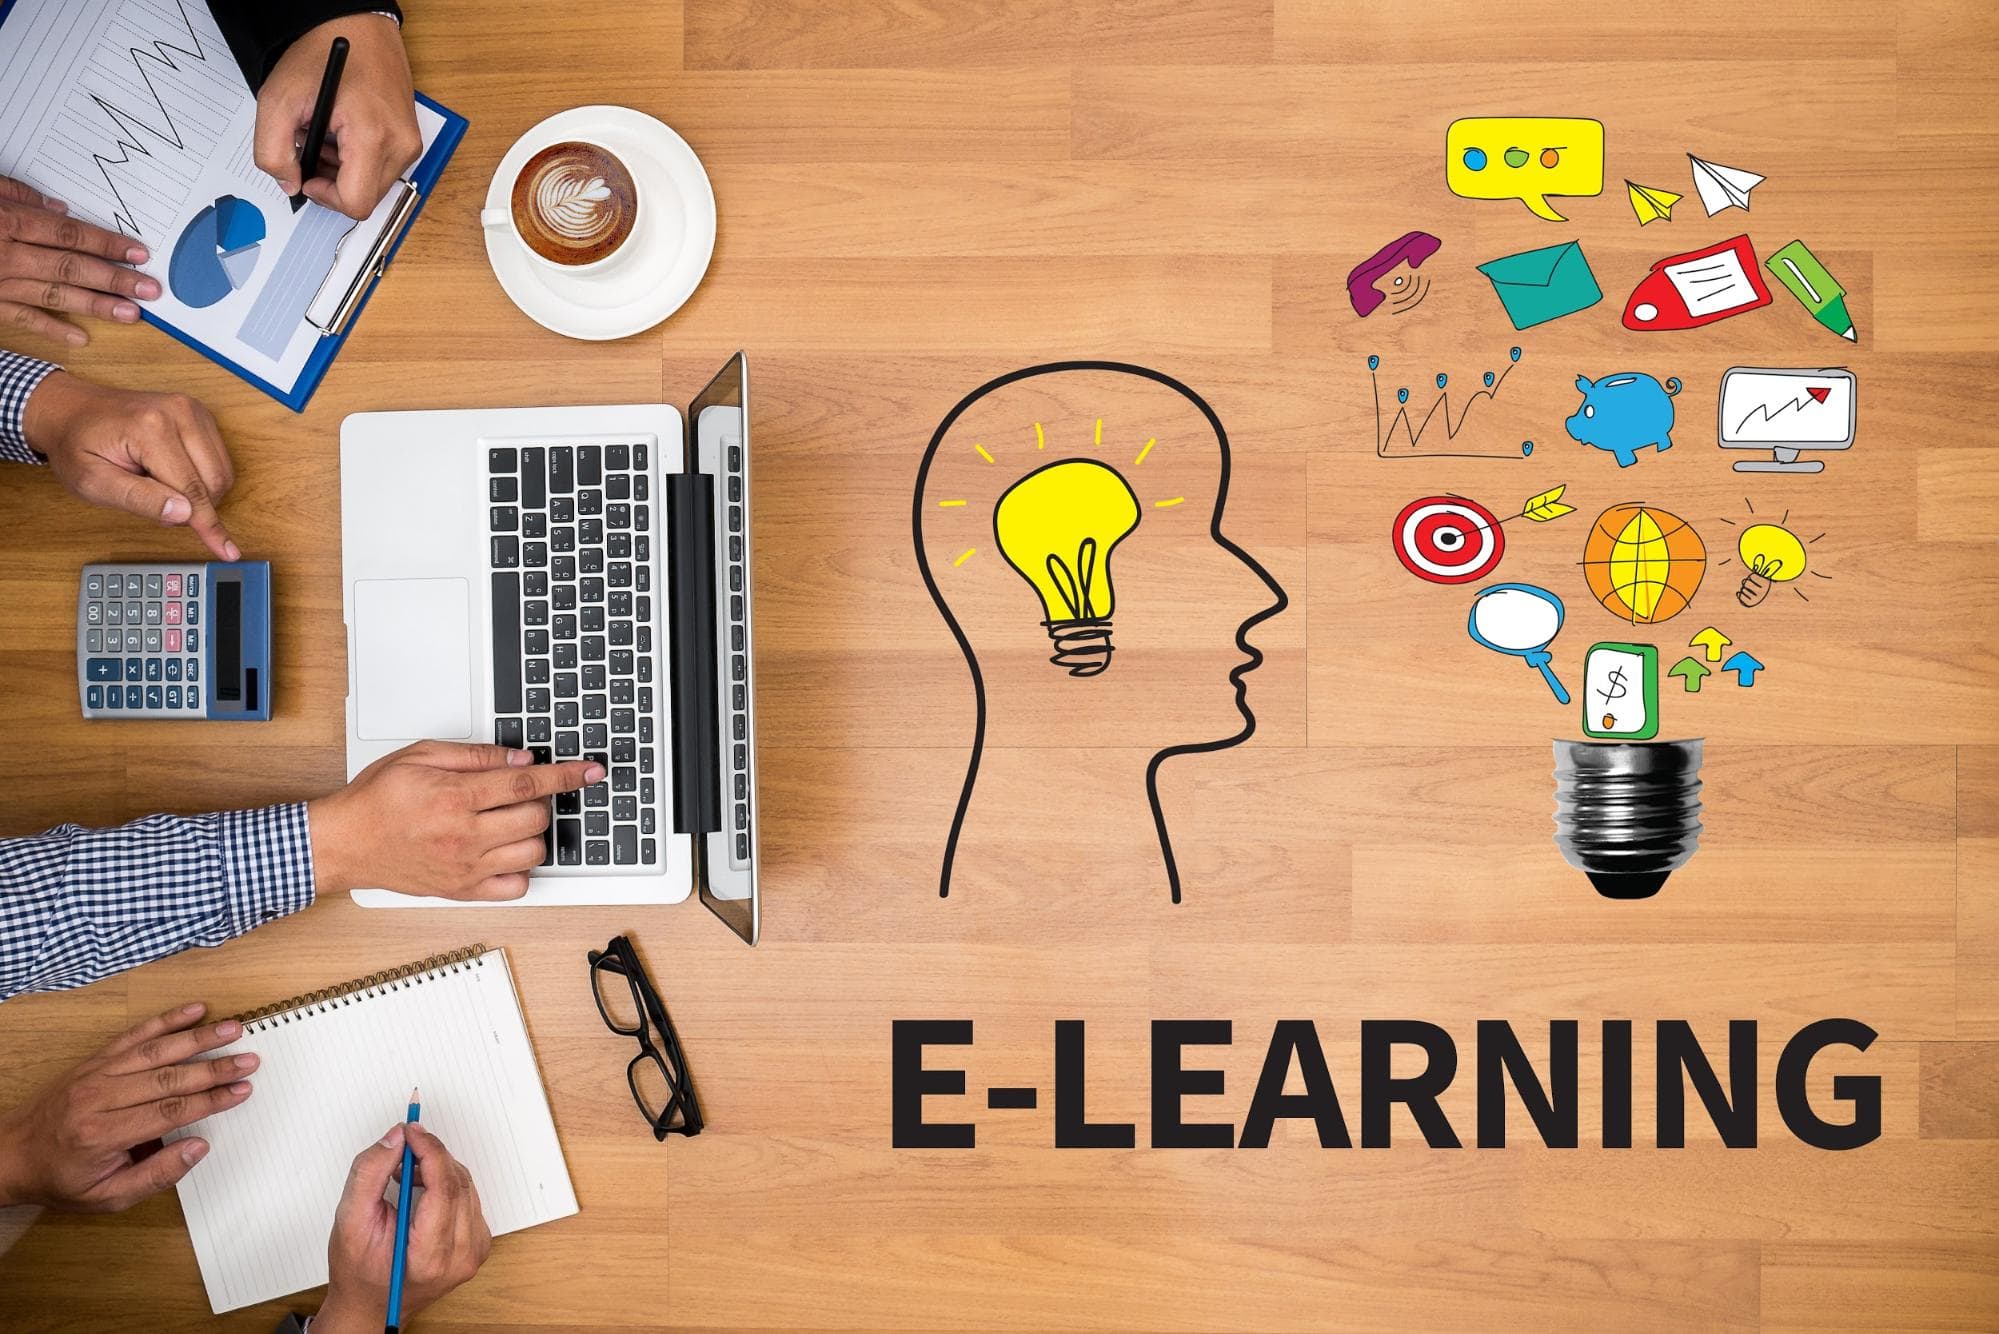 Is e-learning really effective